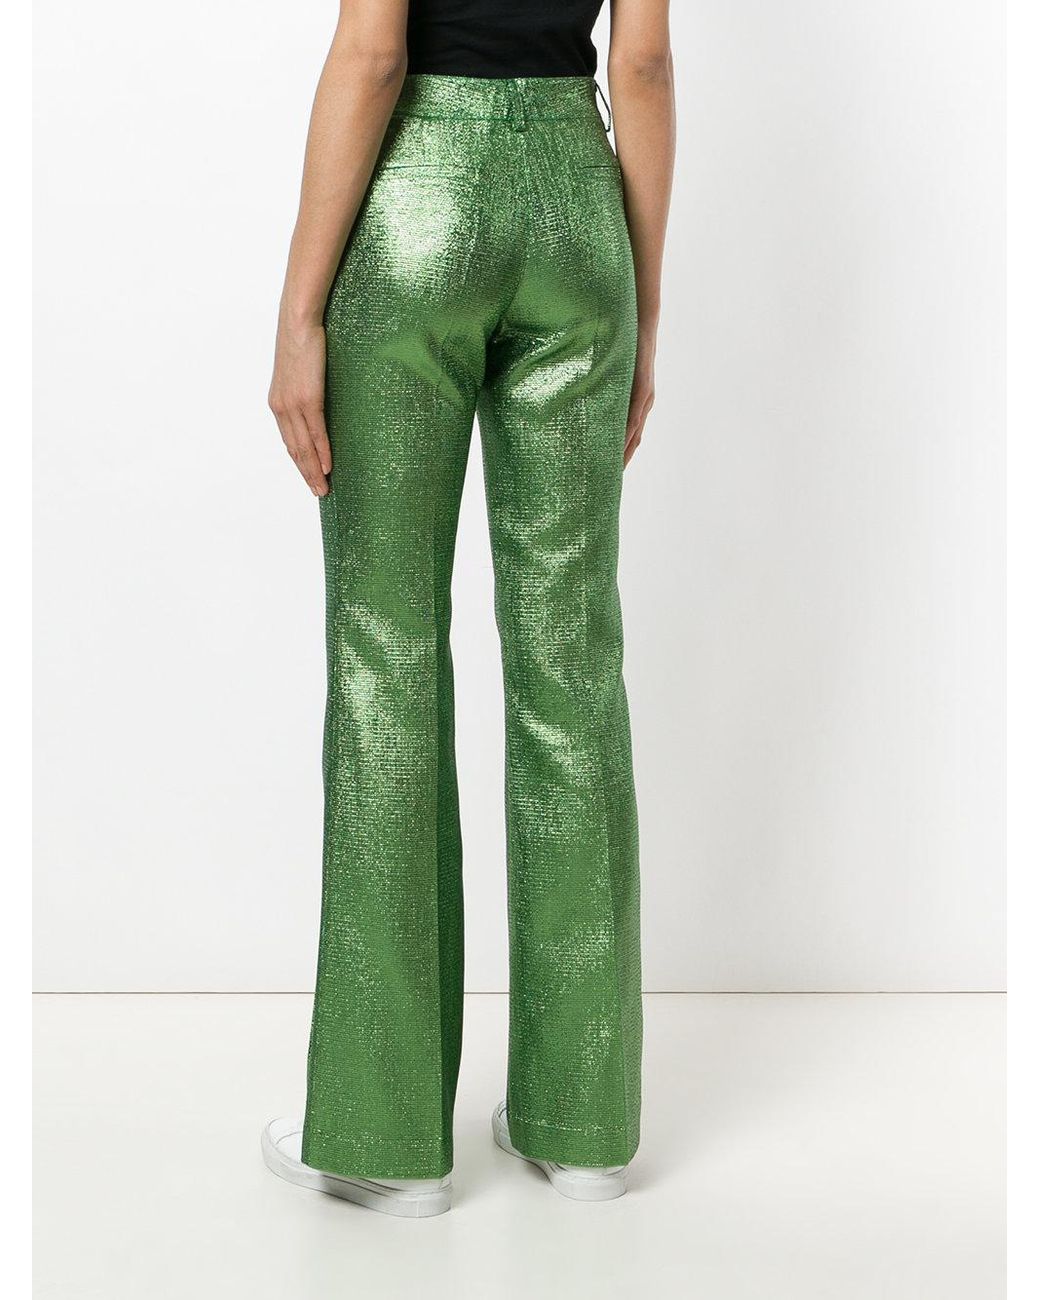 P.A.R.O.S.H. Metallic Flared Trousers in Green | Lyst